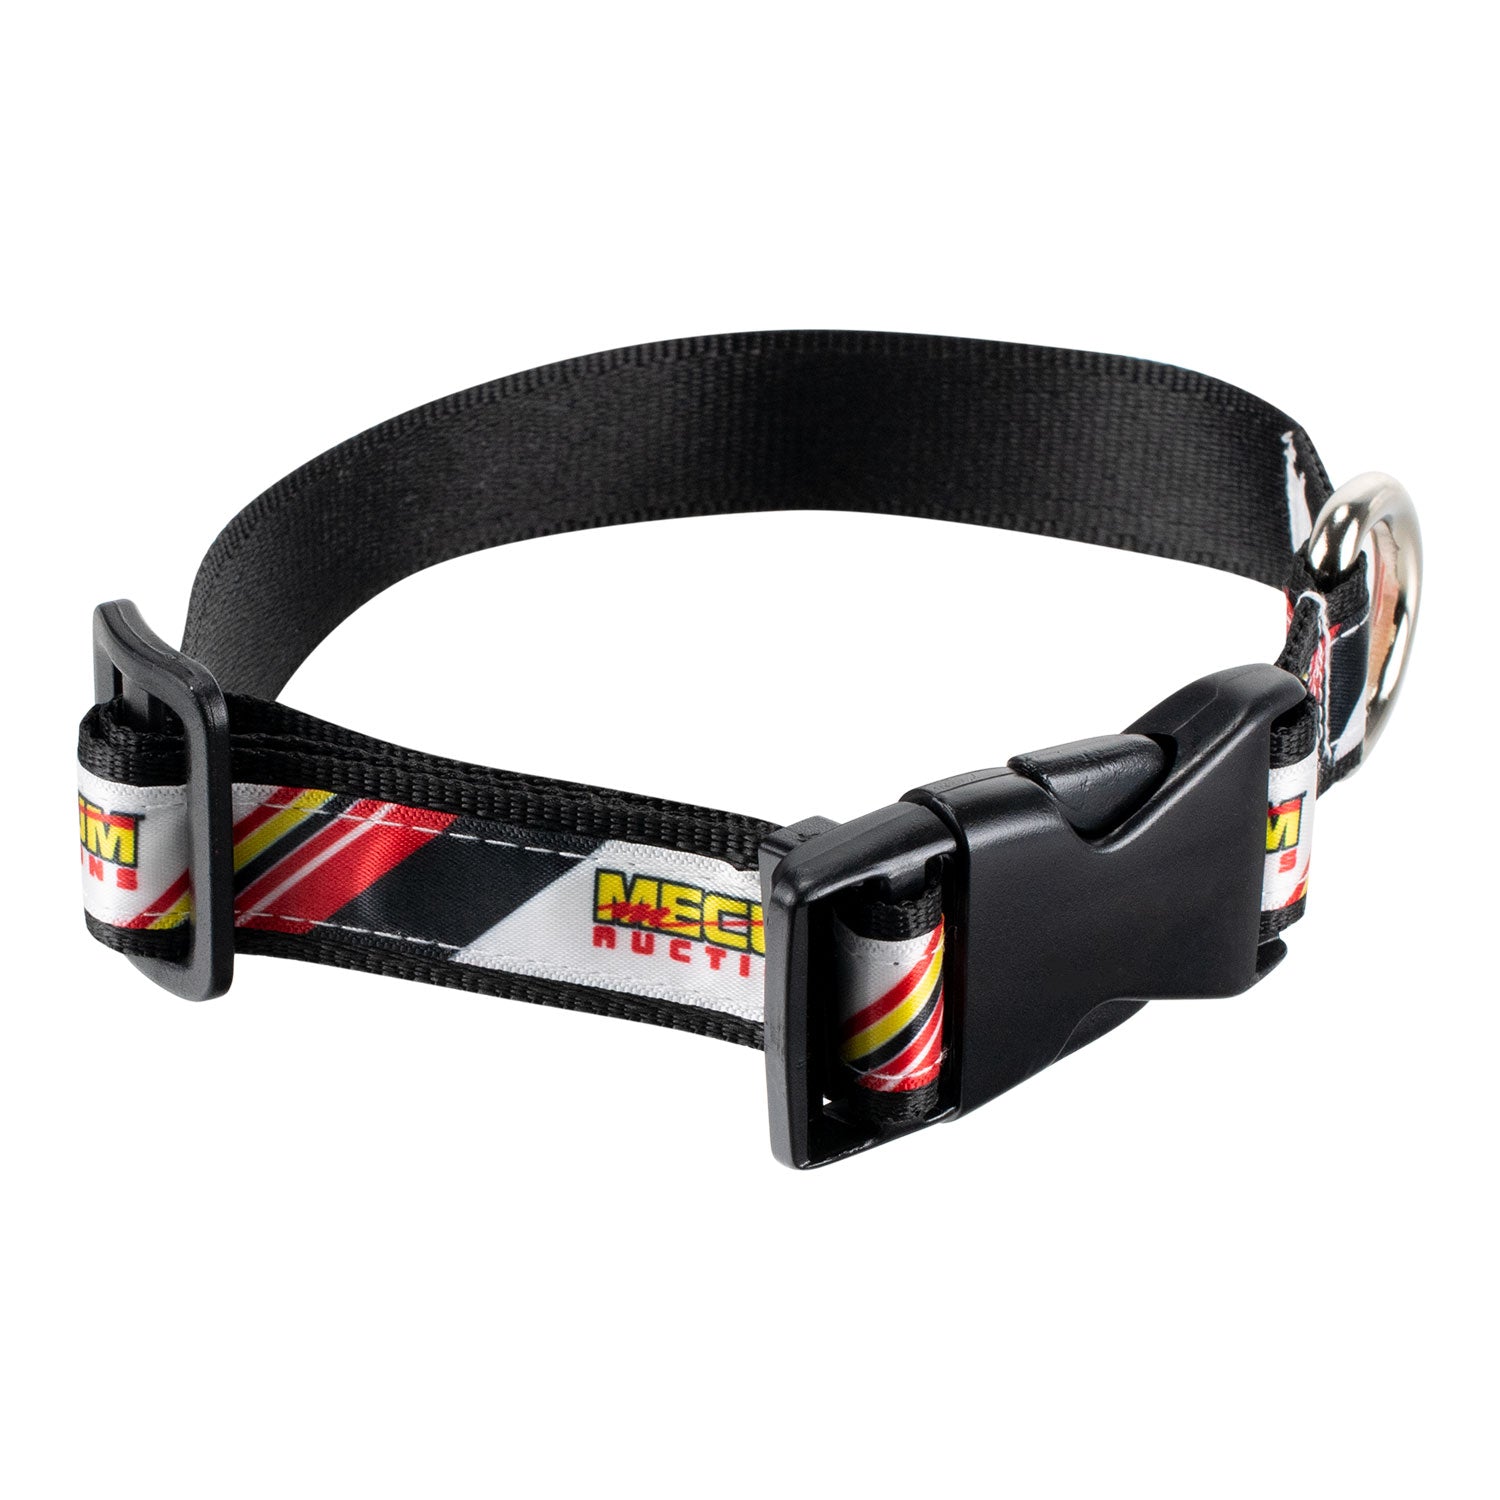 Mecum Auctions Dog Collar S/M - Front View